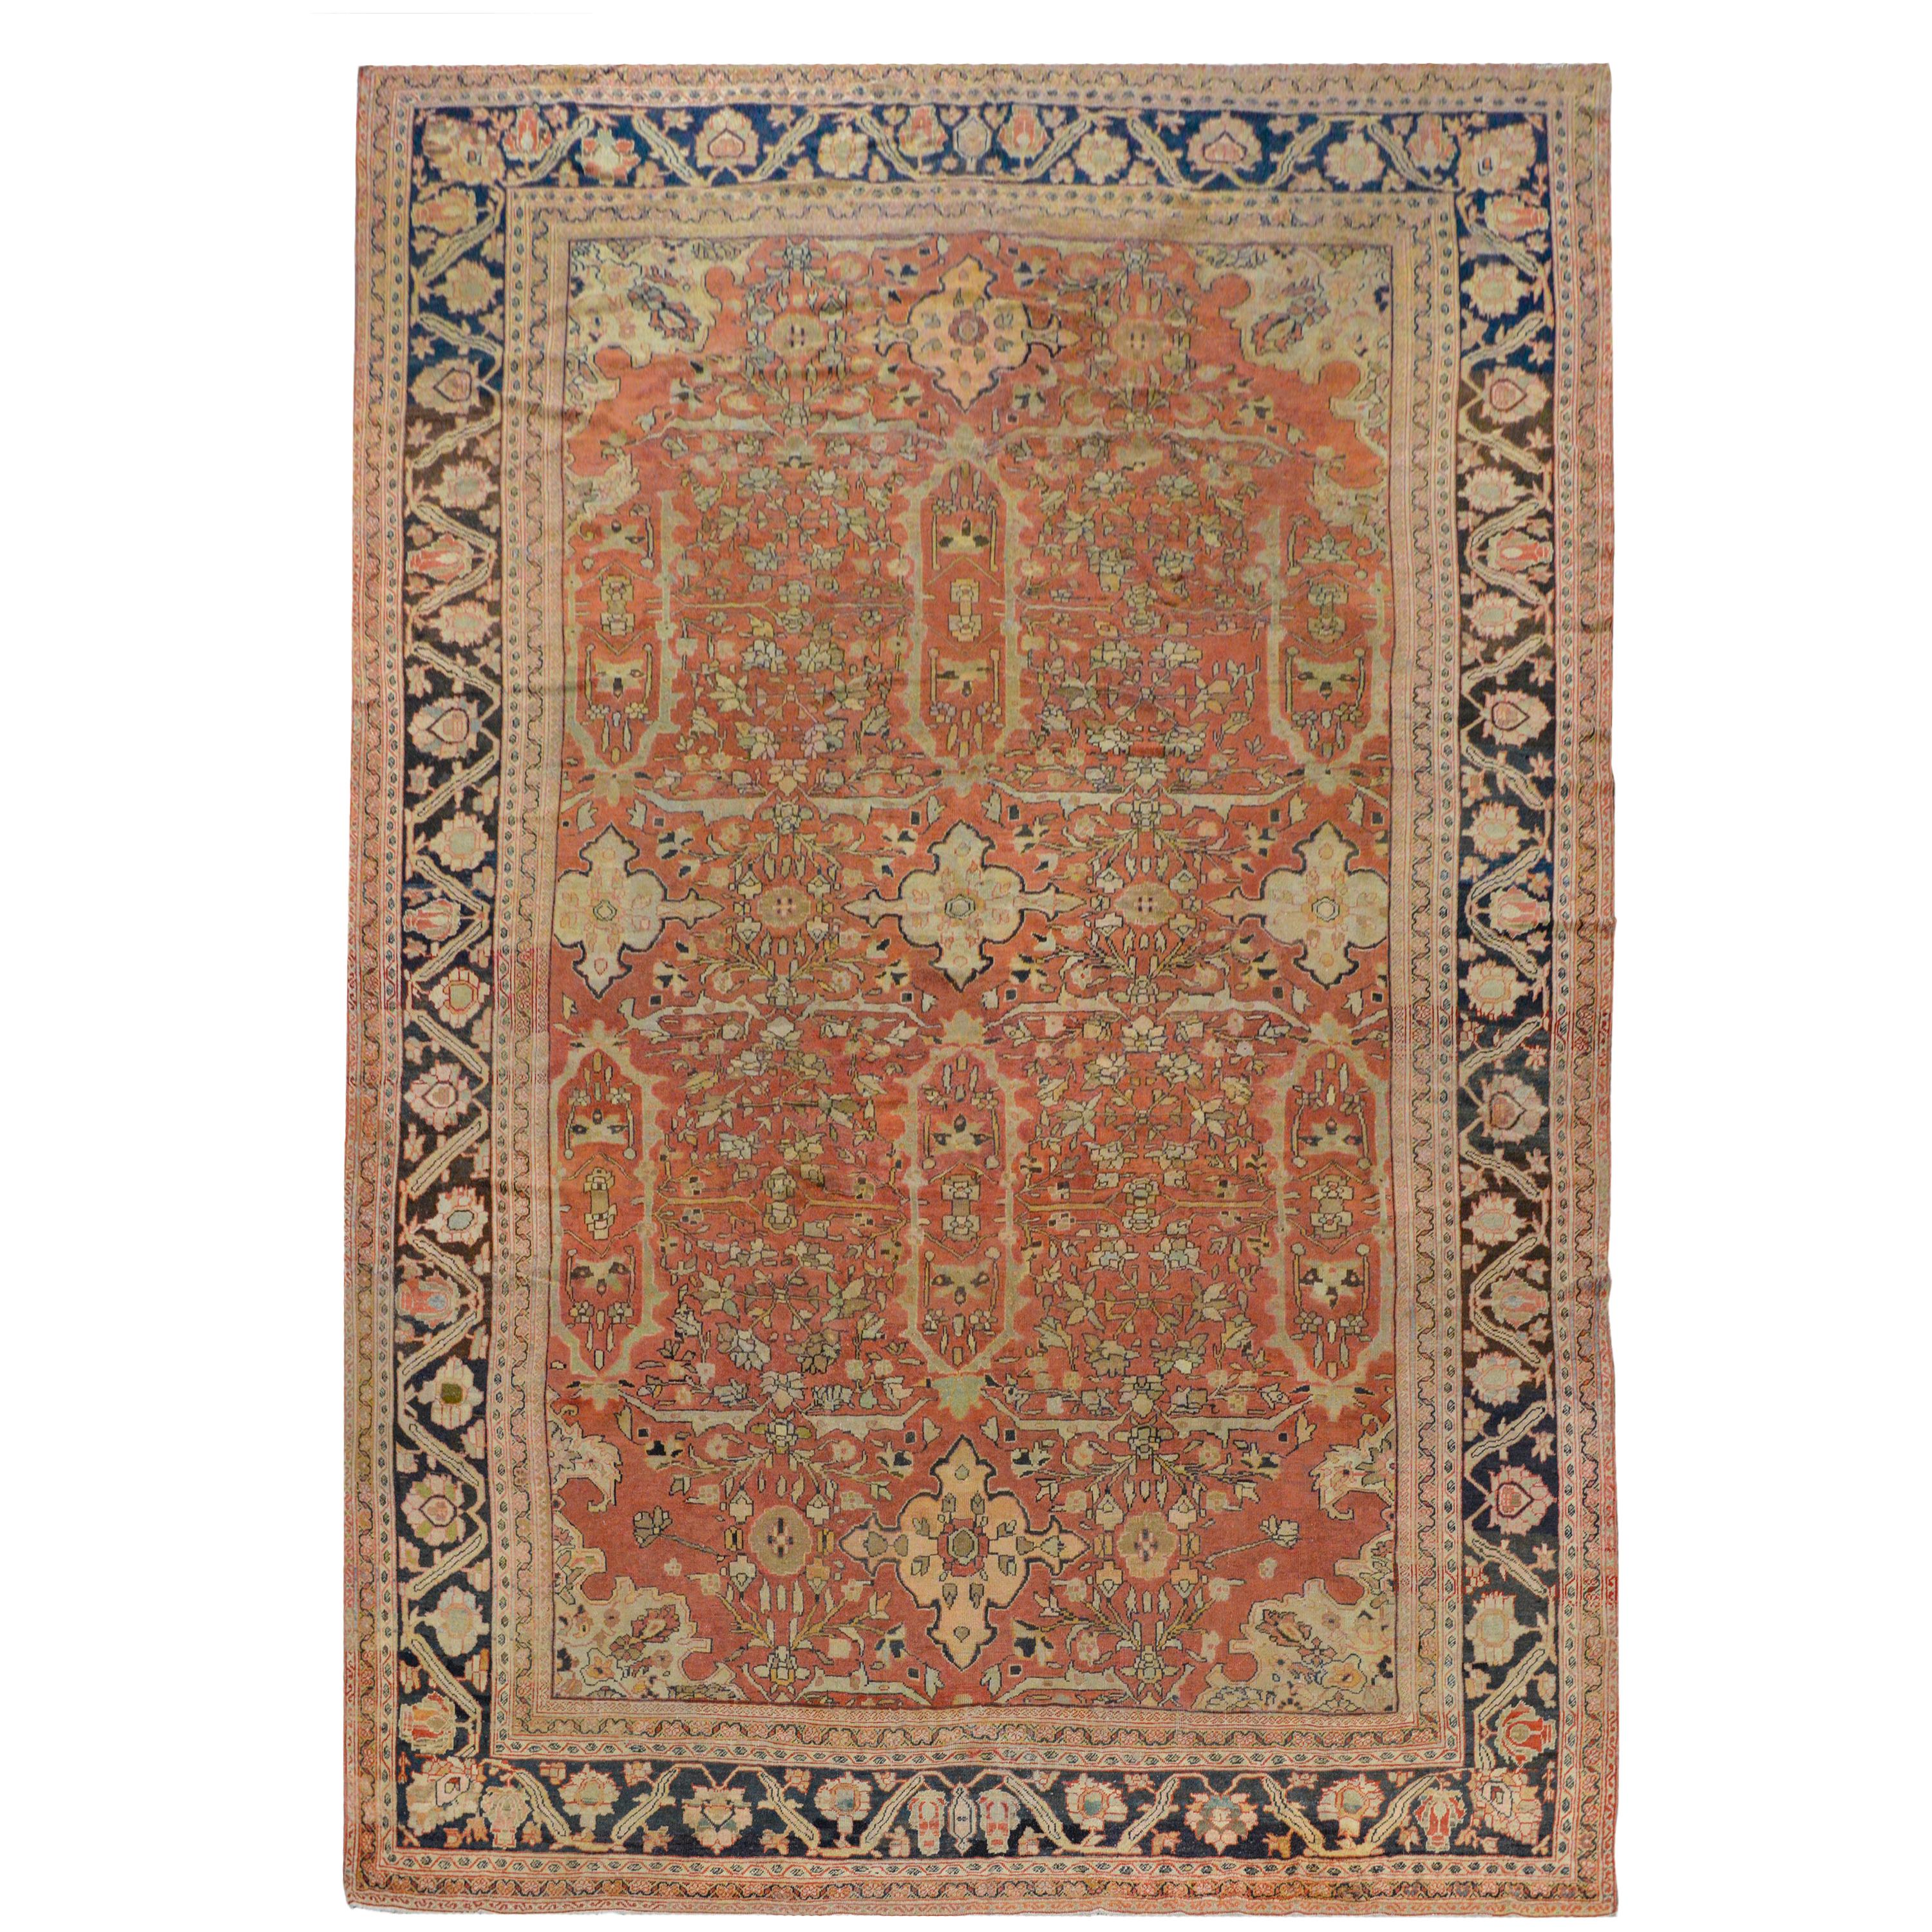 Outstanding Early 20th Century Palatial Sultanabad Rug